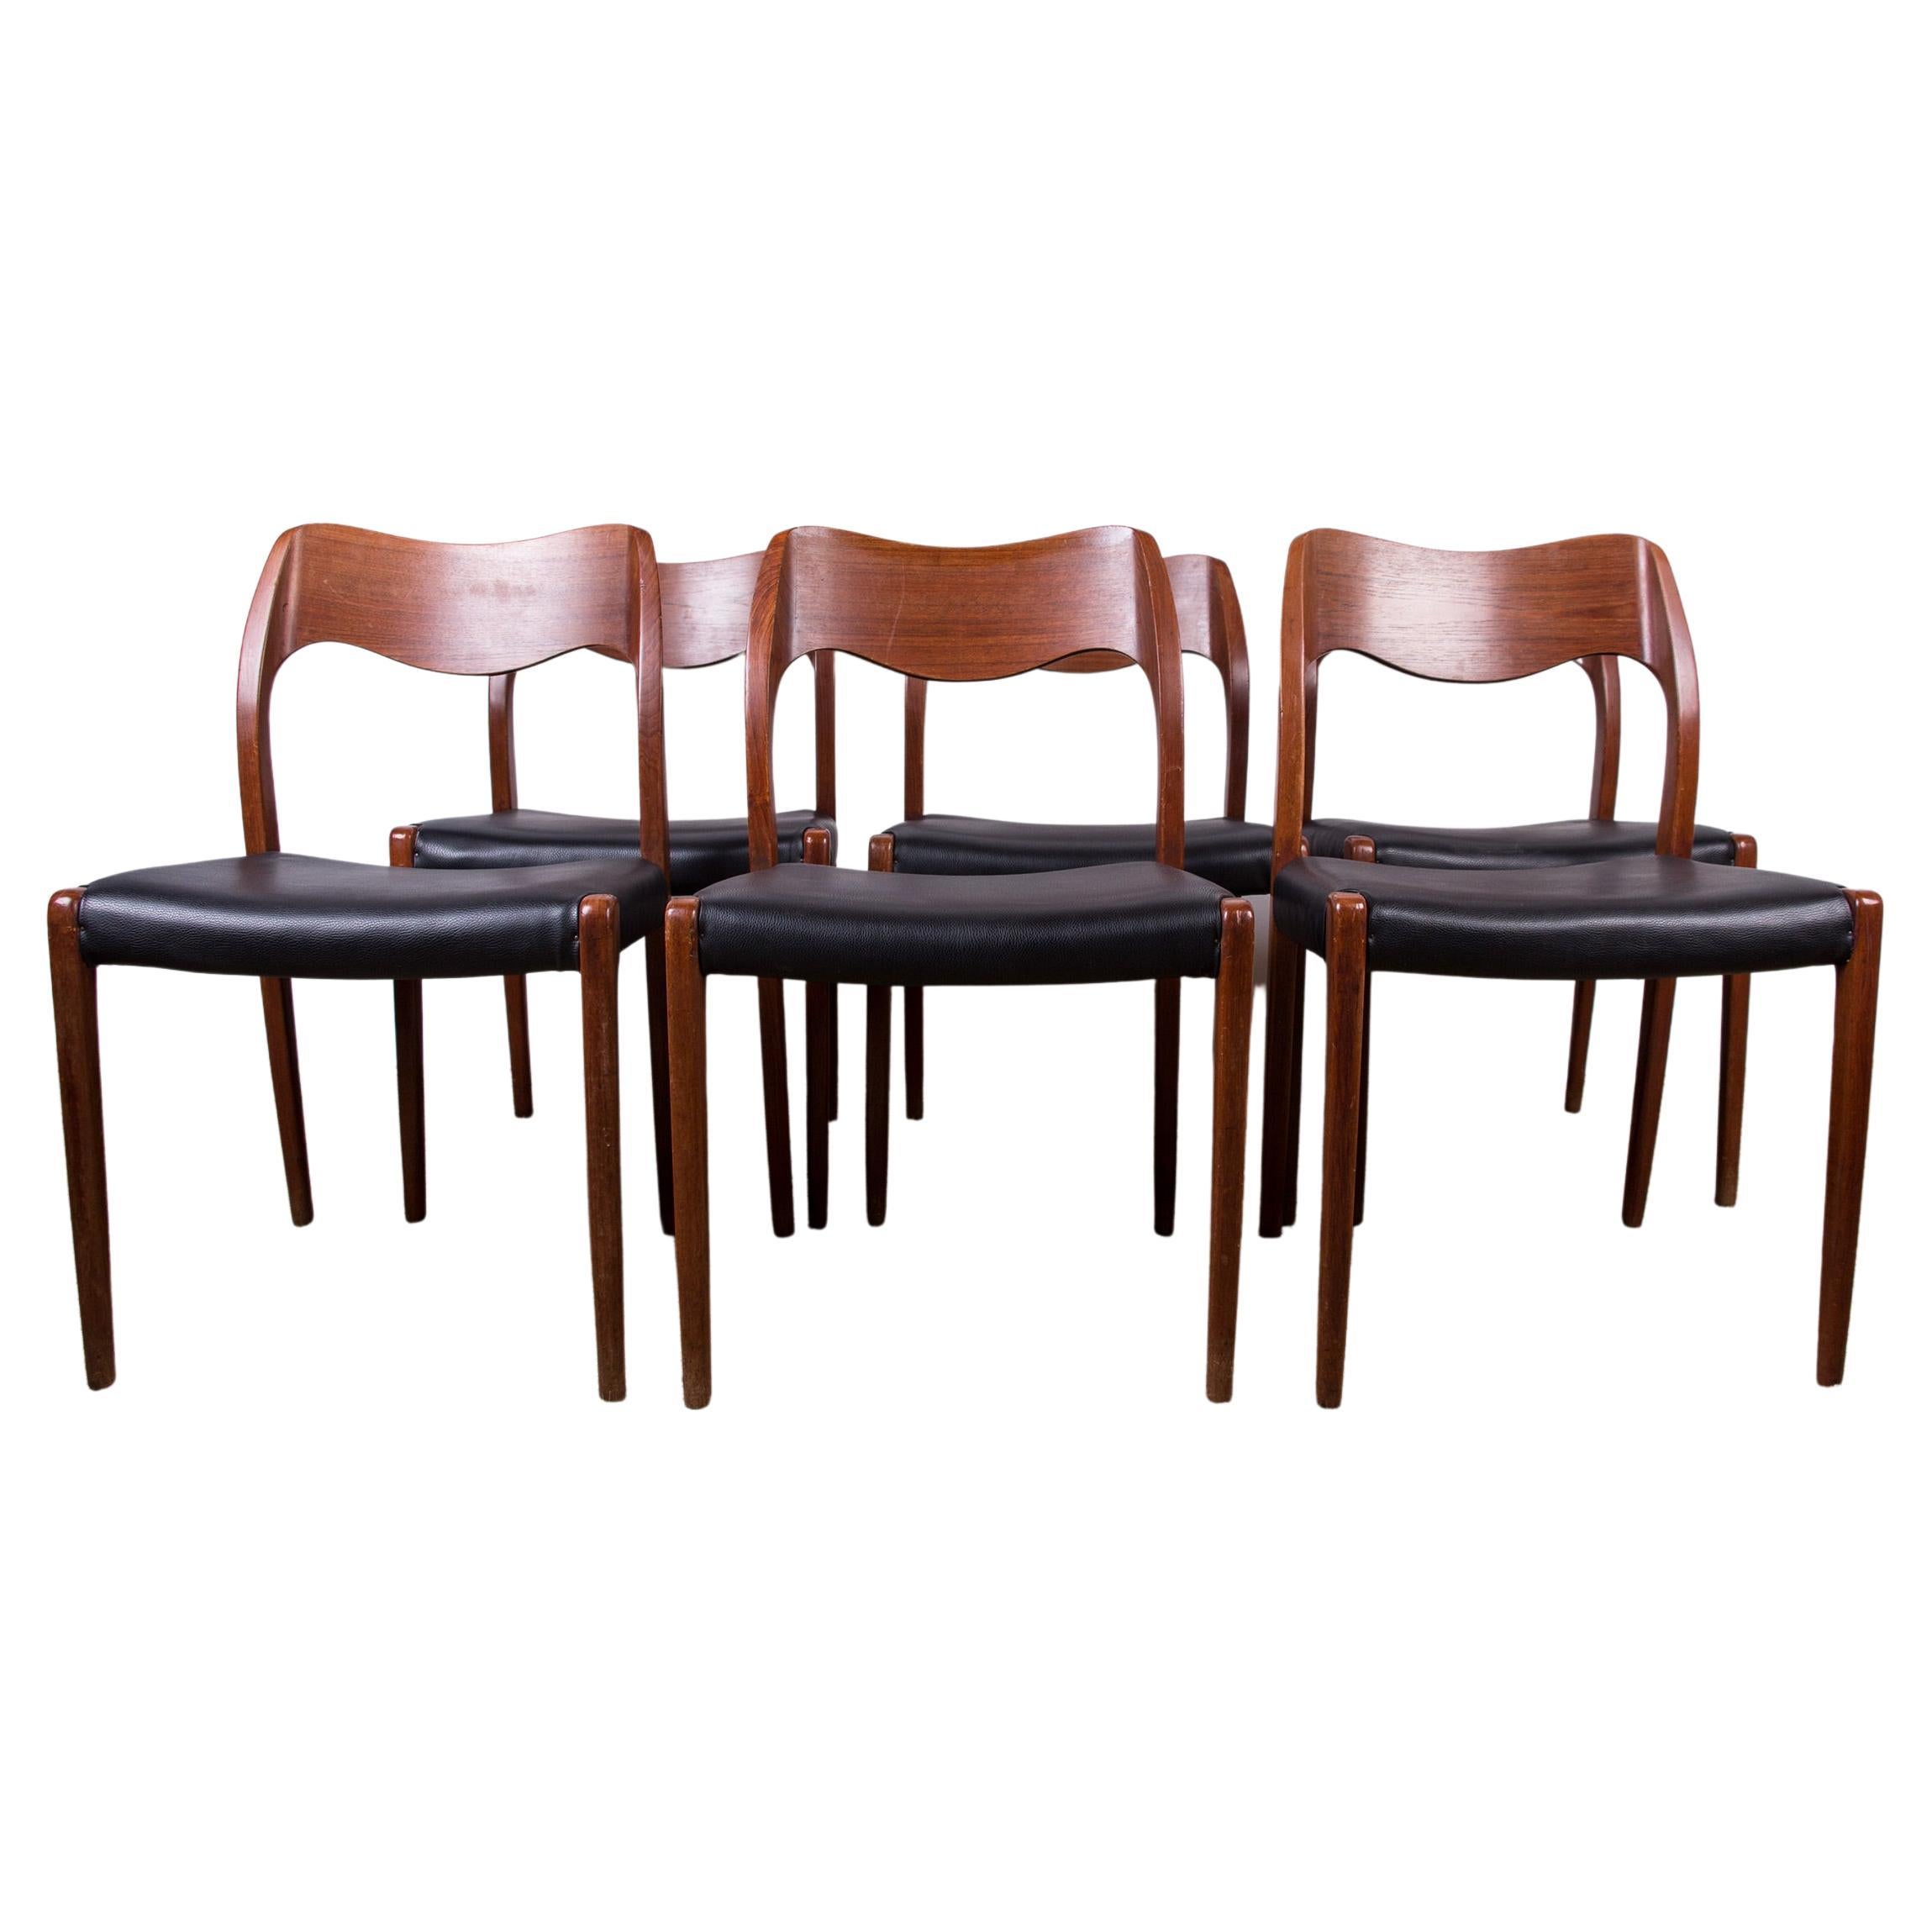 Set of 6 Dining Chairs Model 71 Teak and Skai by Niels O. Moller for JL Mollers